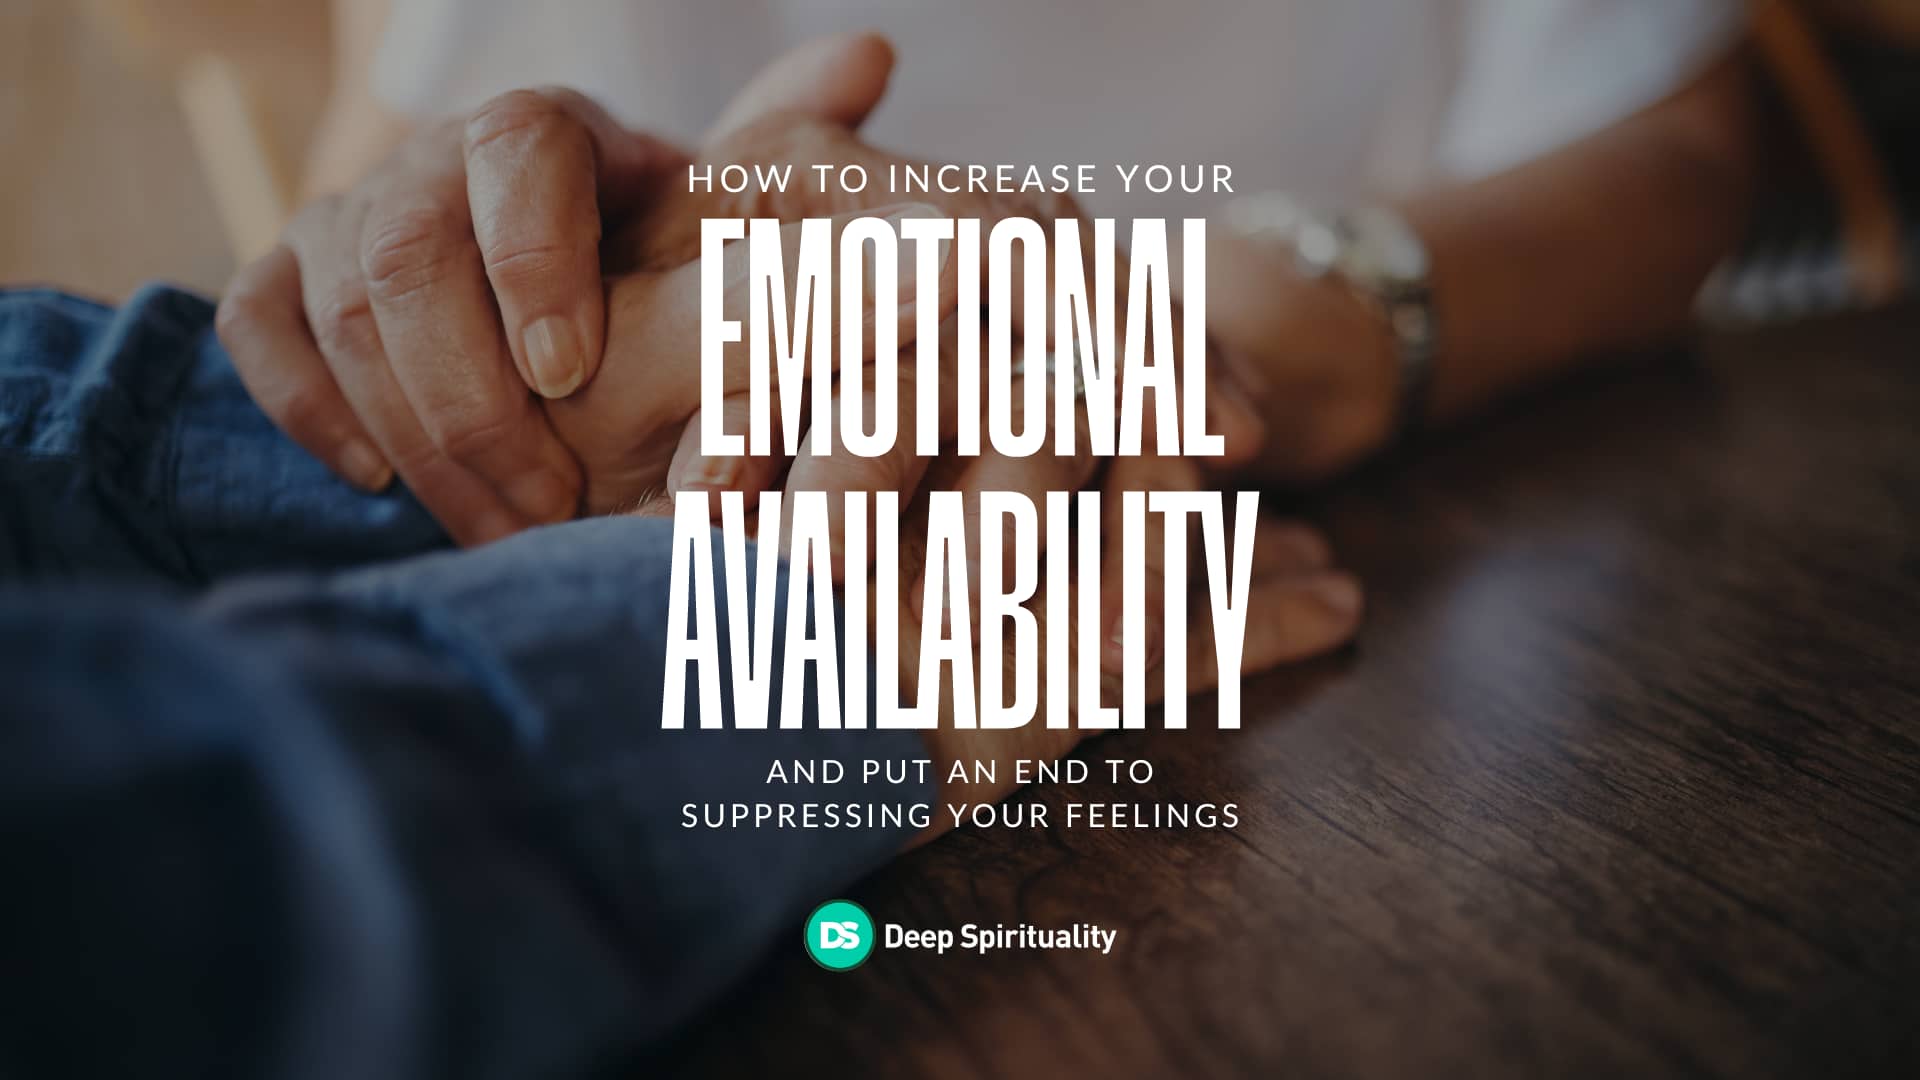 How to Increase Your Emotional Availability and Put an End to Suppressing Your Feelings 2